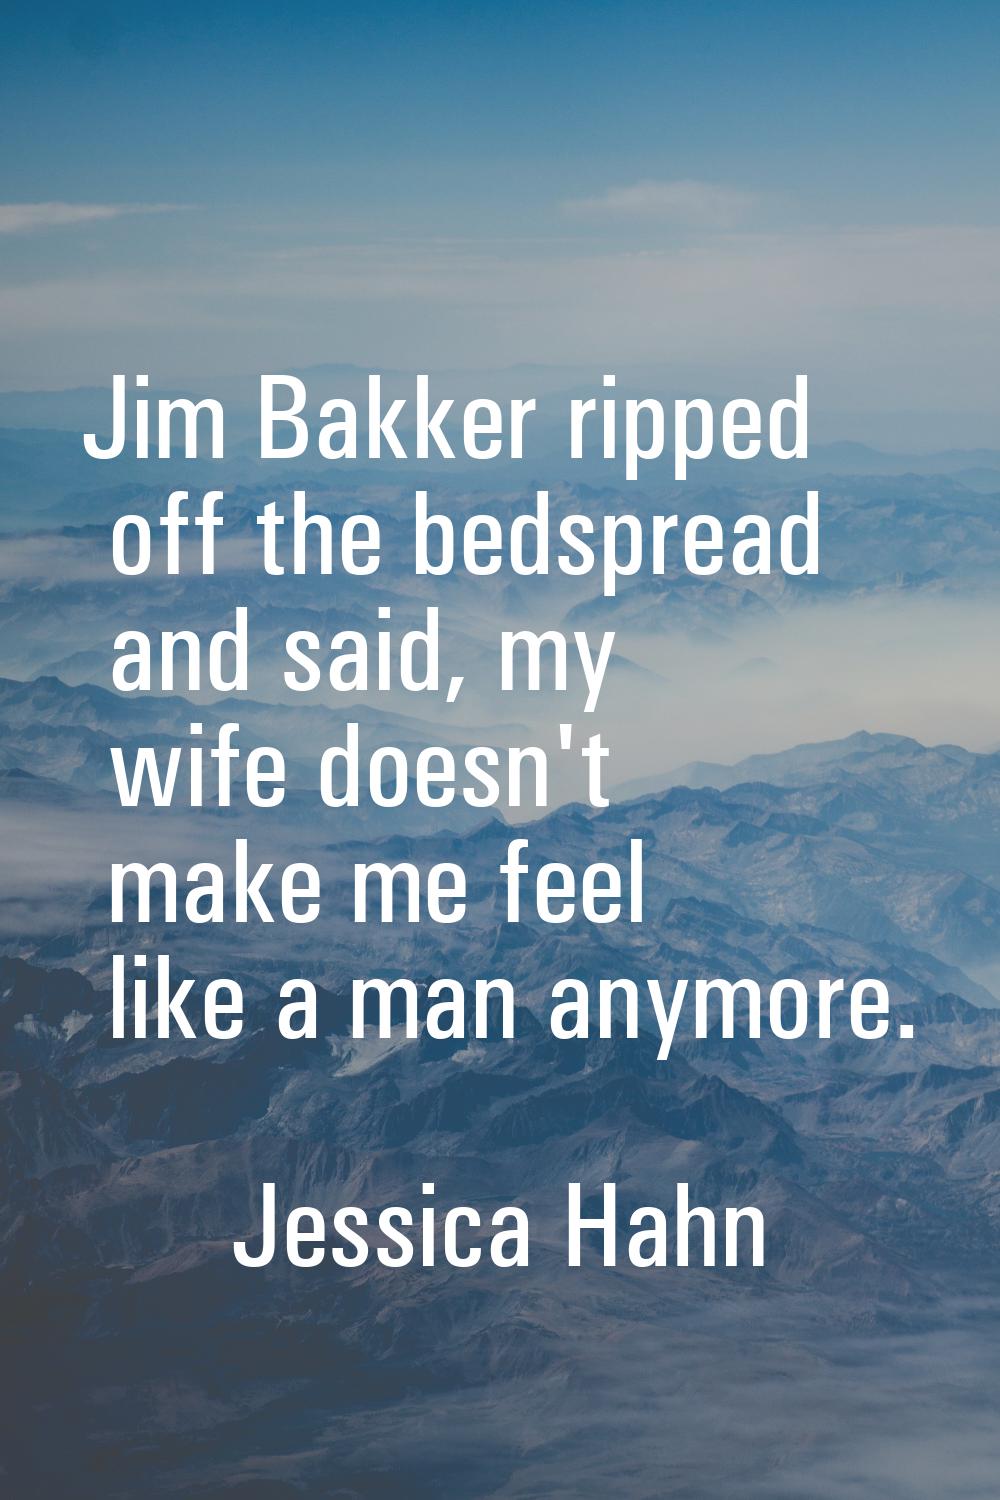 Jim Bakker ripped off the bedspread and said, my wife doesn't make me feel like a man anymore.